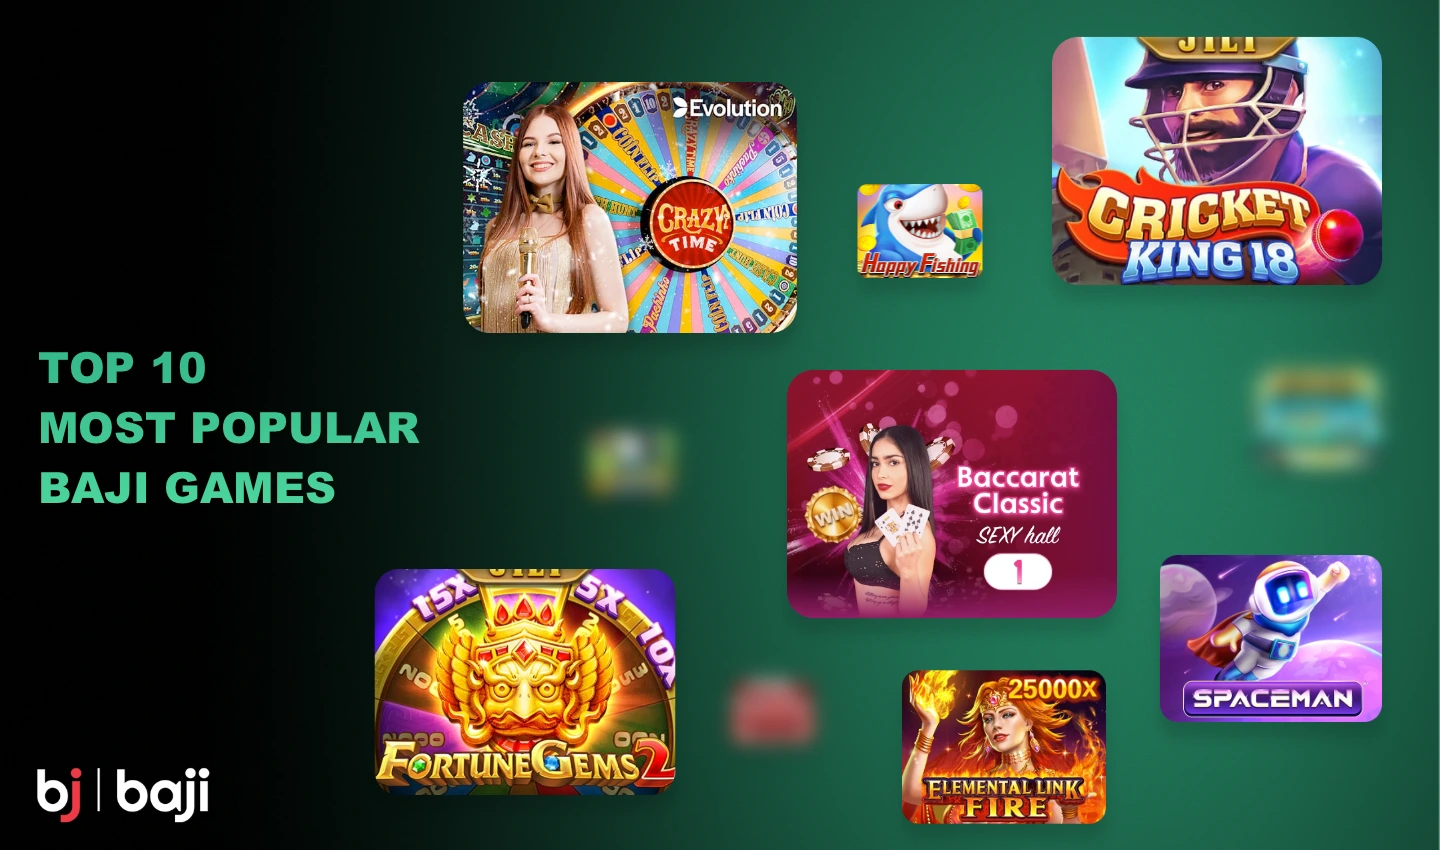 The list of the best games at Baji Casino is formed on the preference of users from all over the world